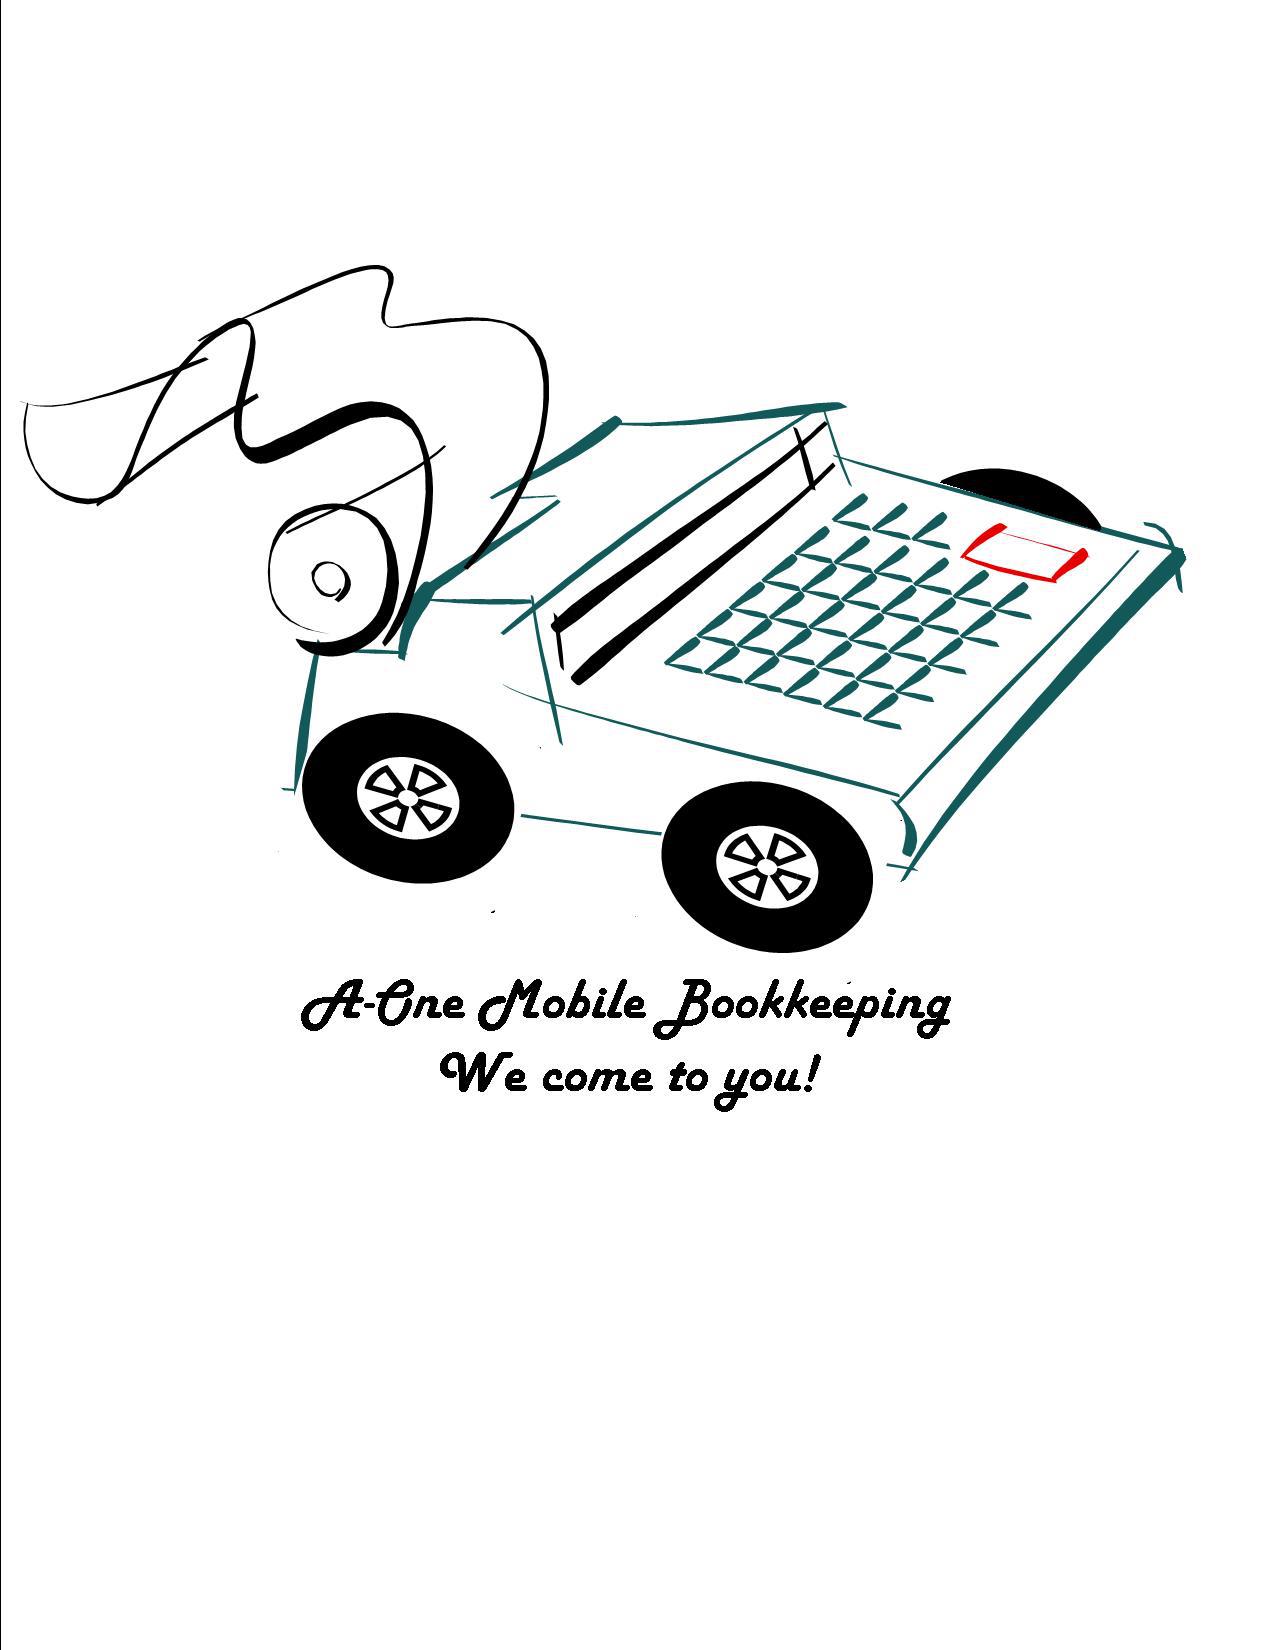 A One Mobile Bookkeeping